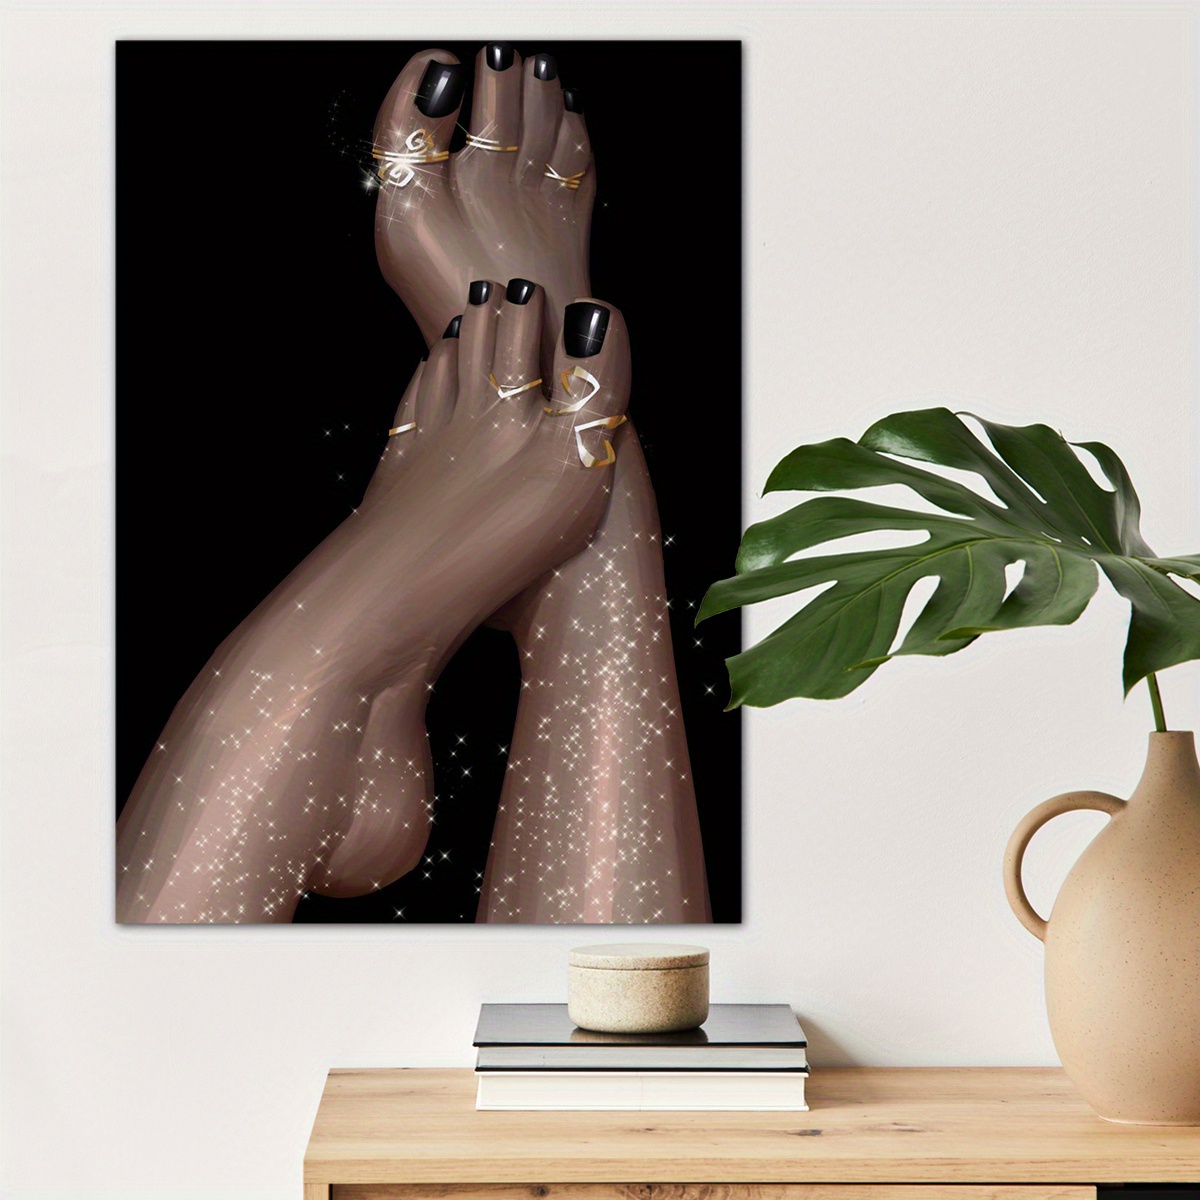 

1pc Feet Anatomy Painting Canvas Wall Art For Home Decor, High Quality And Fans Wall Decor, Canvas Prints For Living Room Bedroom Bathroom Kitchen Office Cafe Decor, Perfect Gift And Decoration